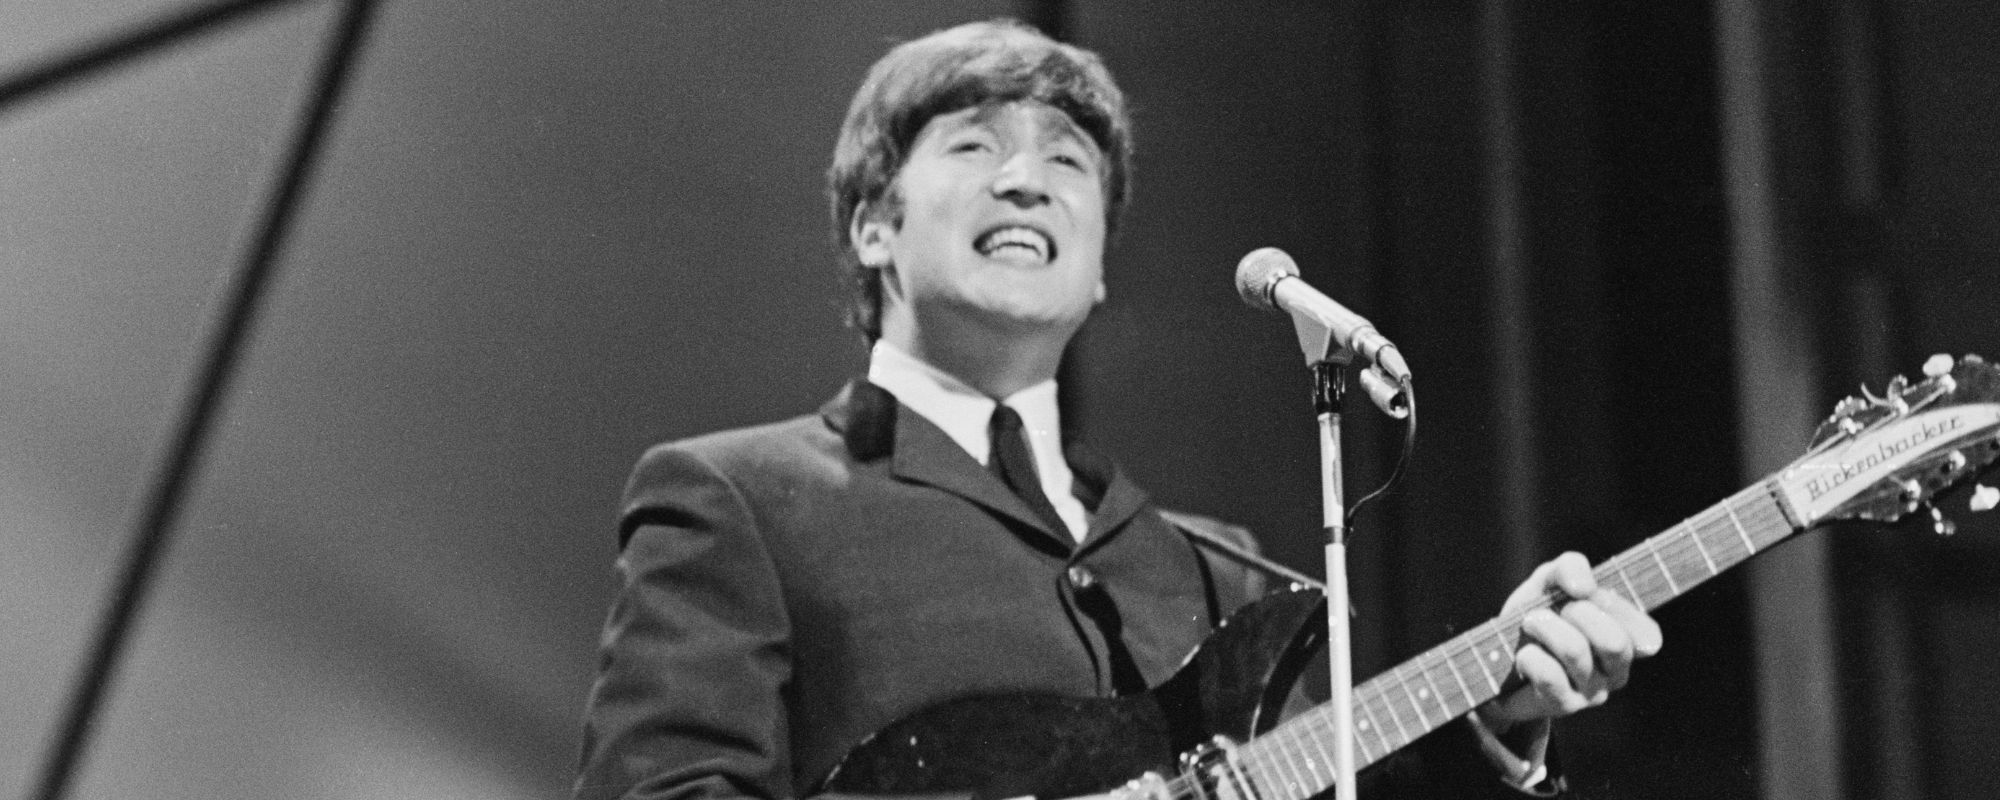 Why John Lennon Thought His Banned Song Was A Societal Problem, Not His Problem